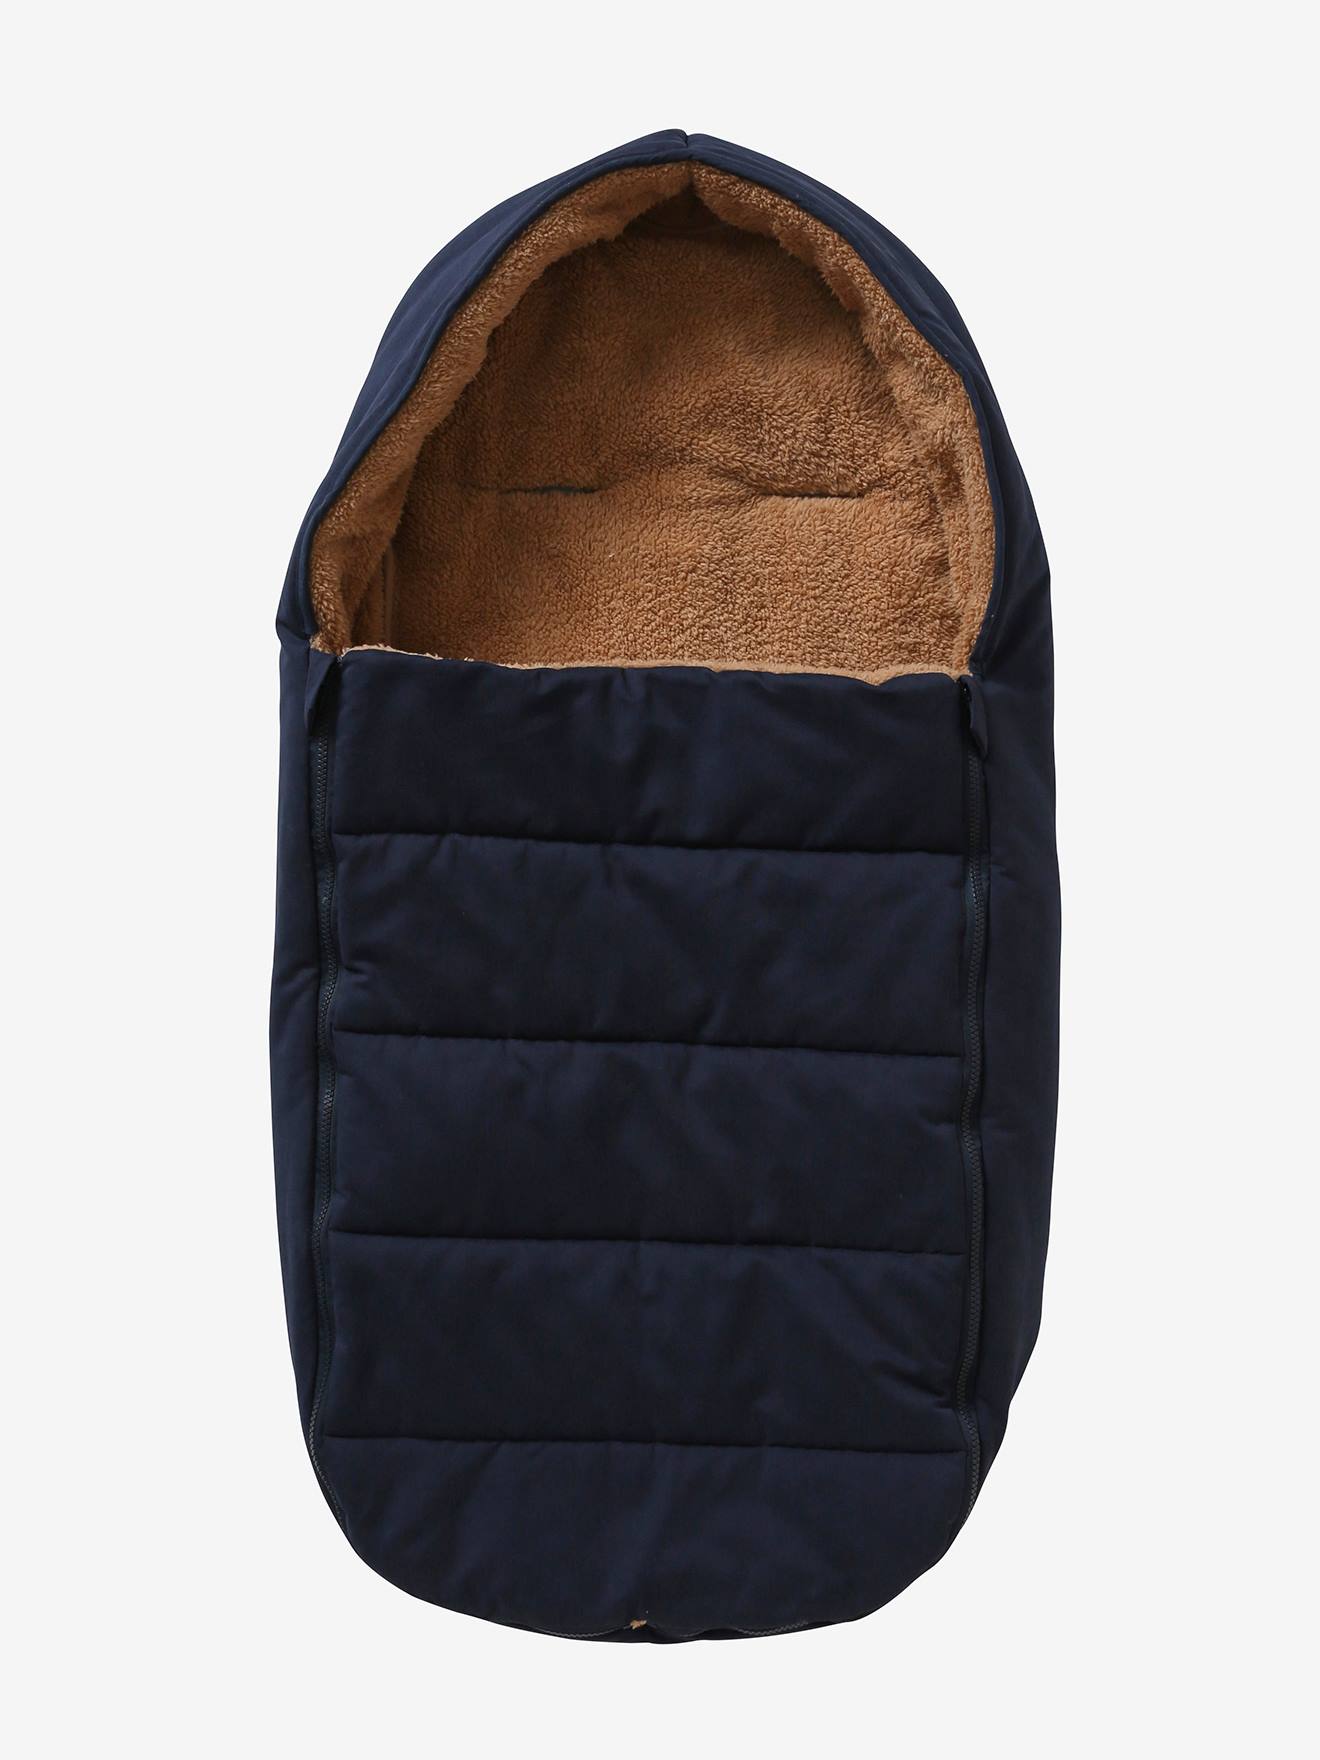 Footmuff for Pushchair in Water-Repellent Fabric dark blue